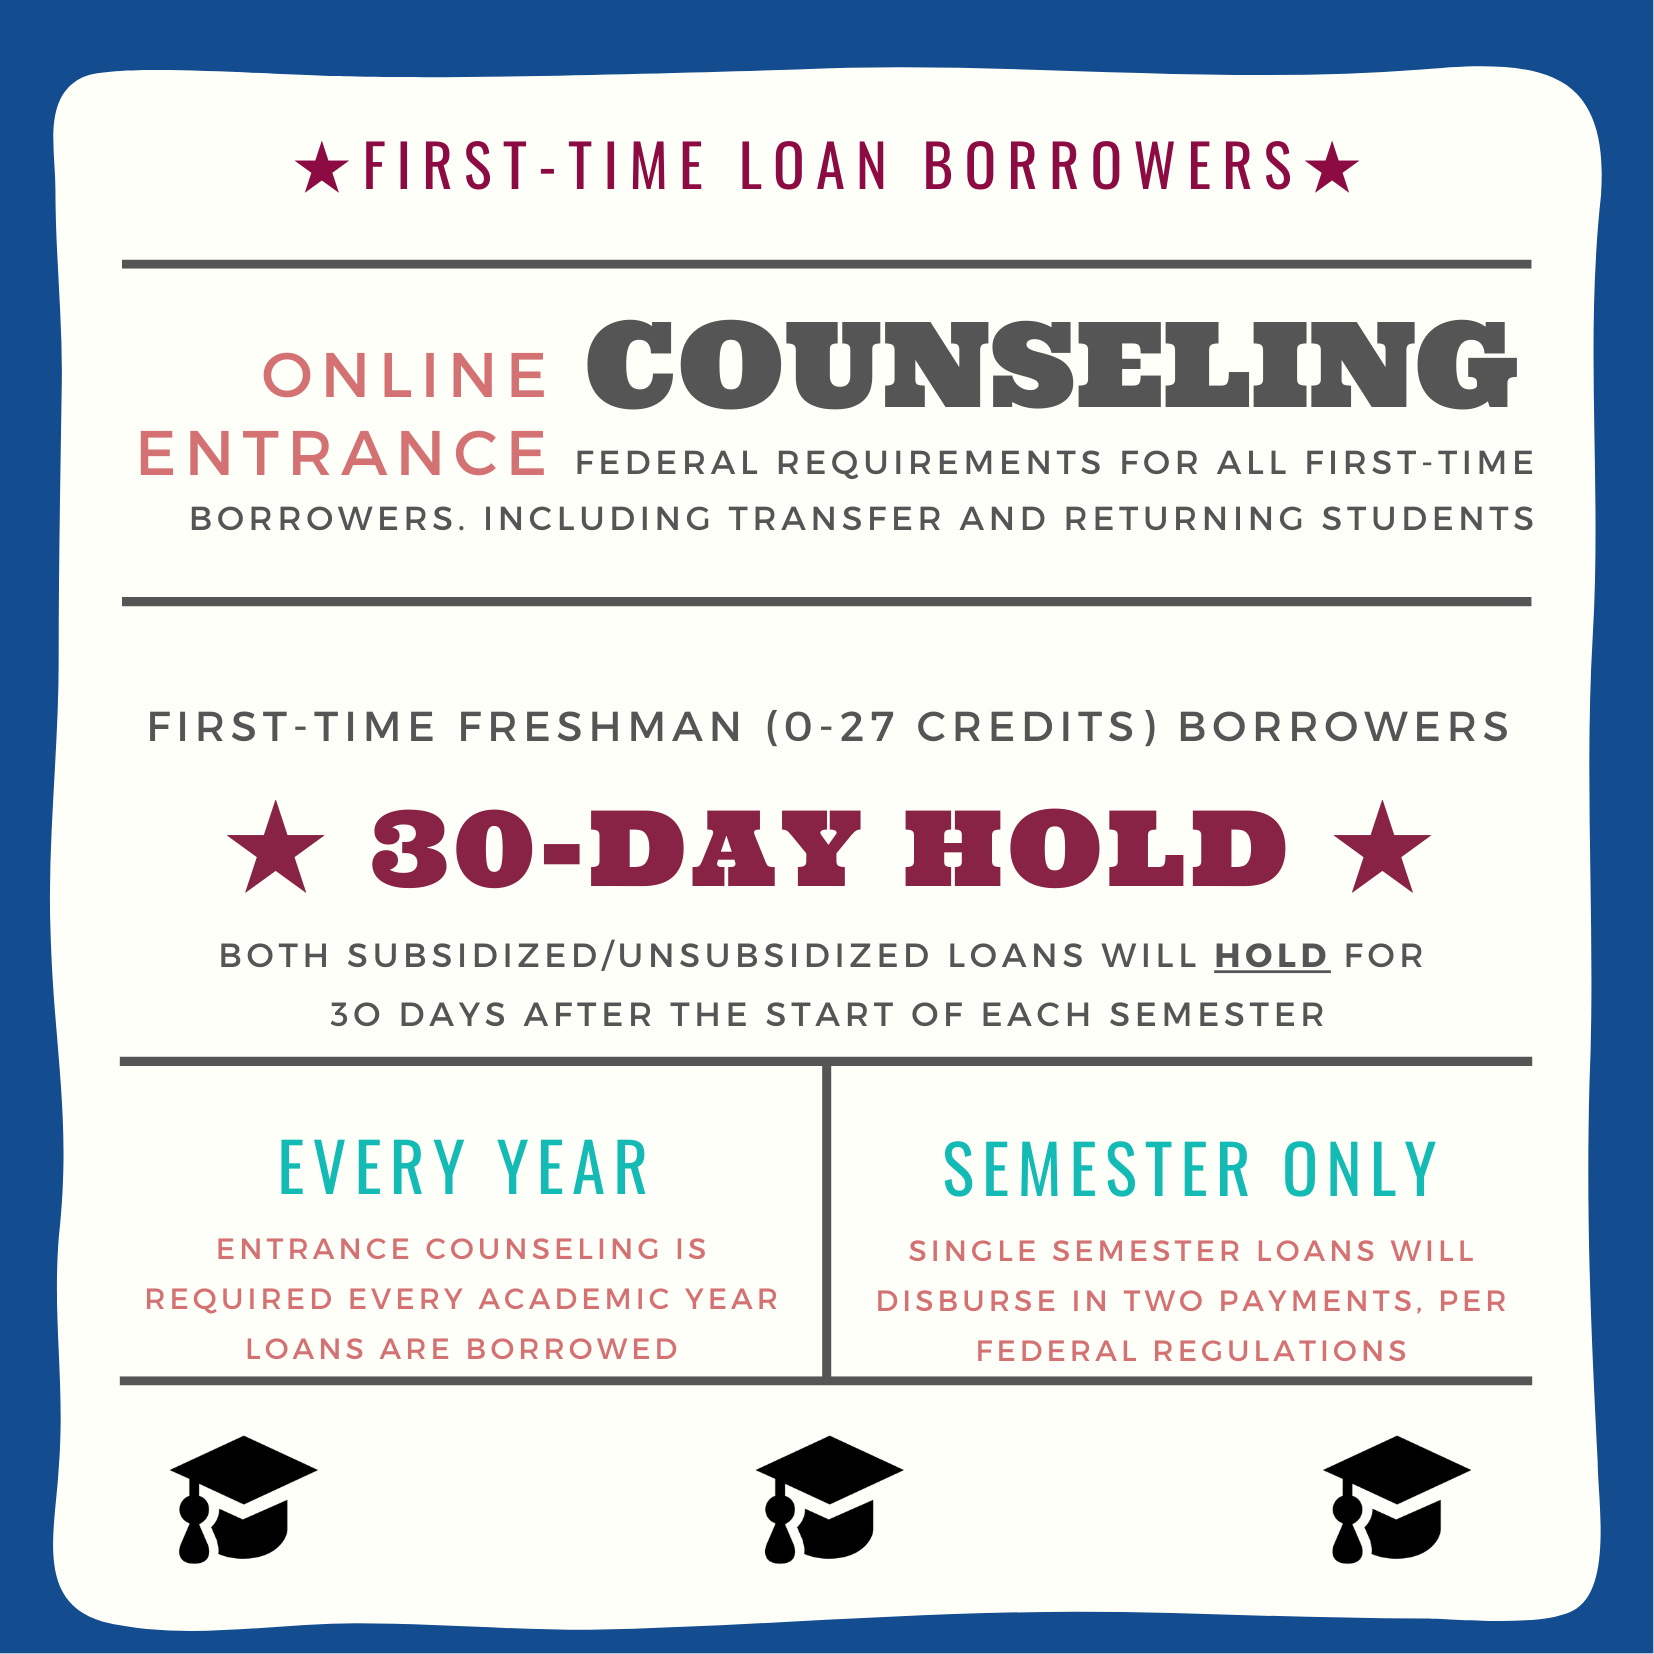 First time loadn borrowers, online entrace counseling! Federal requirements for all first-time borrowers, including transfer and returning students. First-time Freshman (0-27 credits) borrowers get a 30-day hold, Both subsidized and unsubsidized loans will hold for 30 days after the start of each semester. Entrance Counseling is required every academic year loans are borrowed. Single semester loans will disburse in two payments per federal regulations.